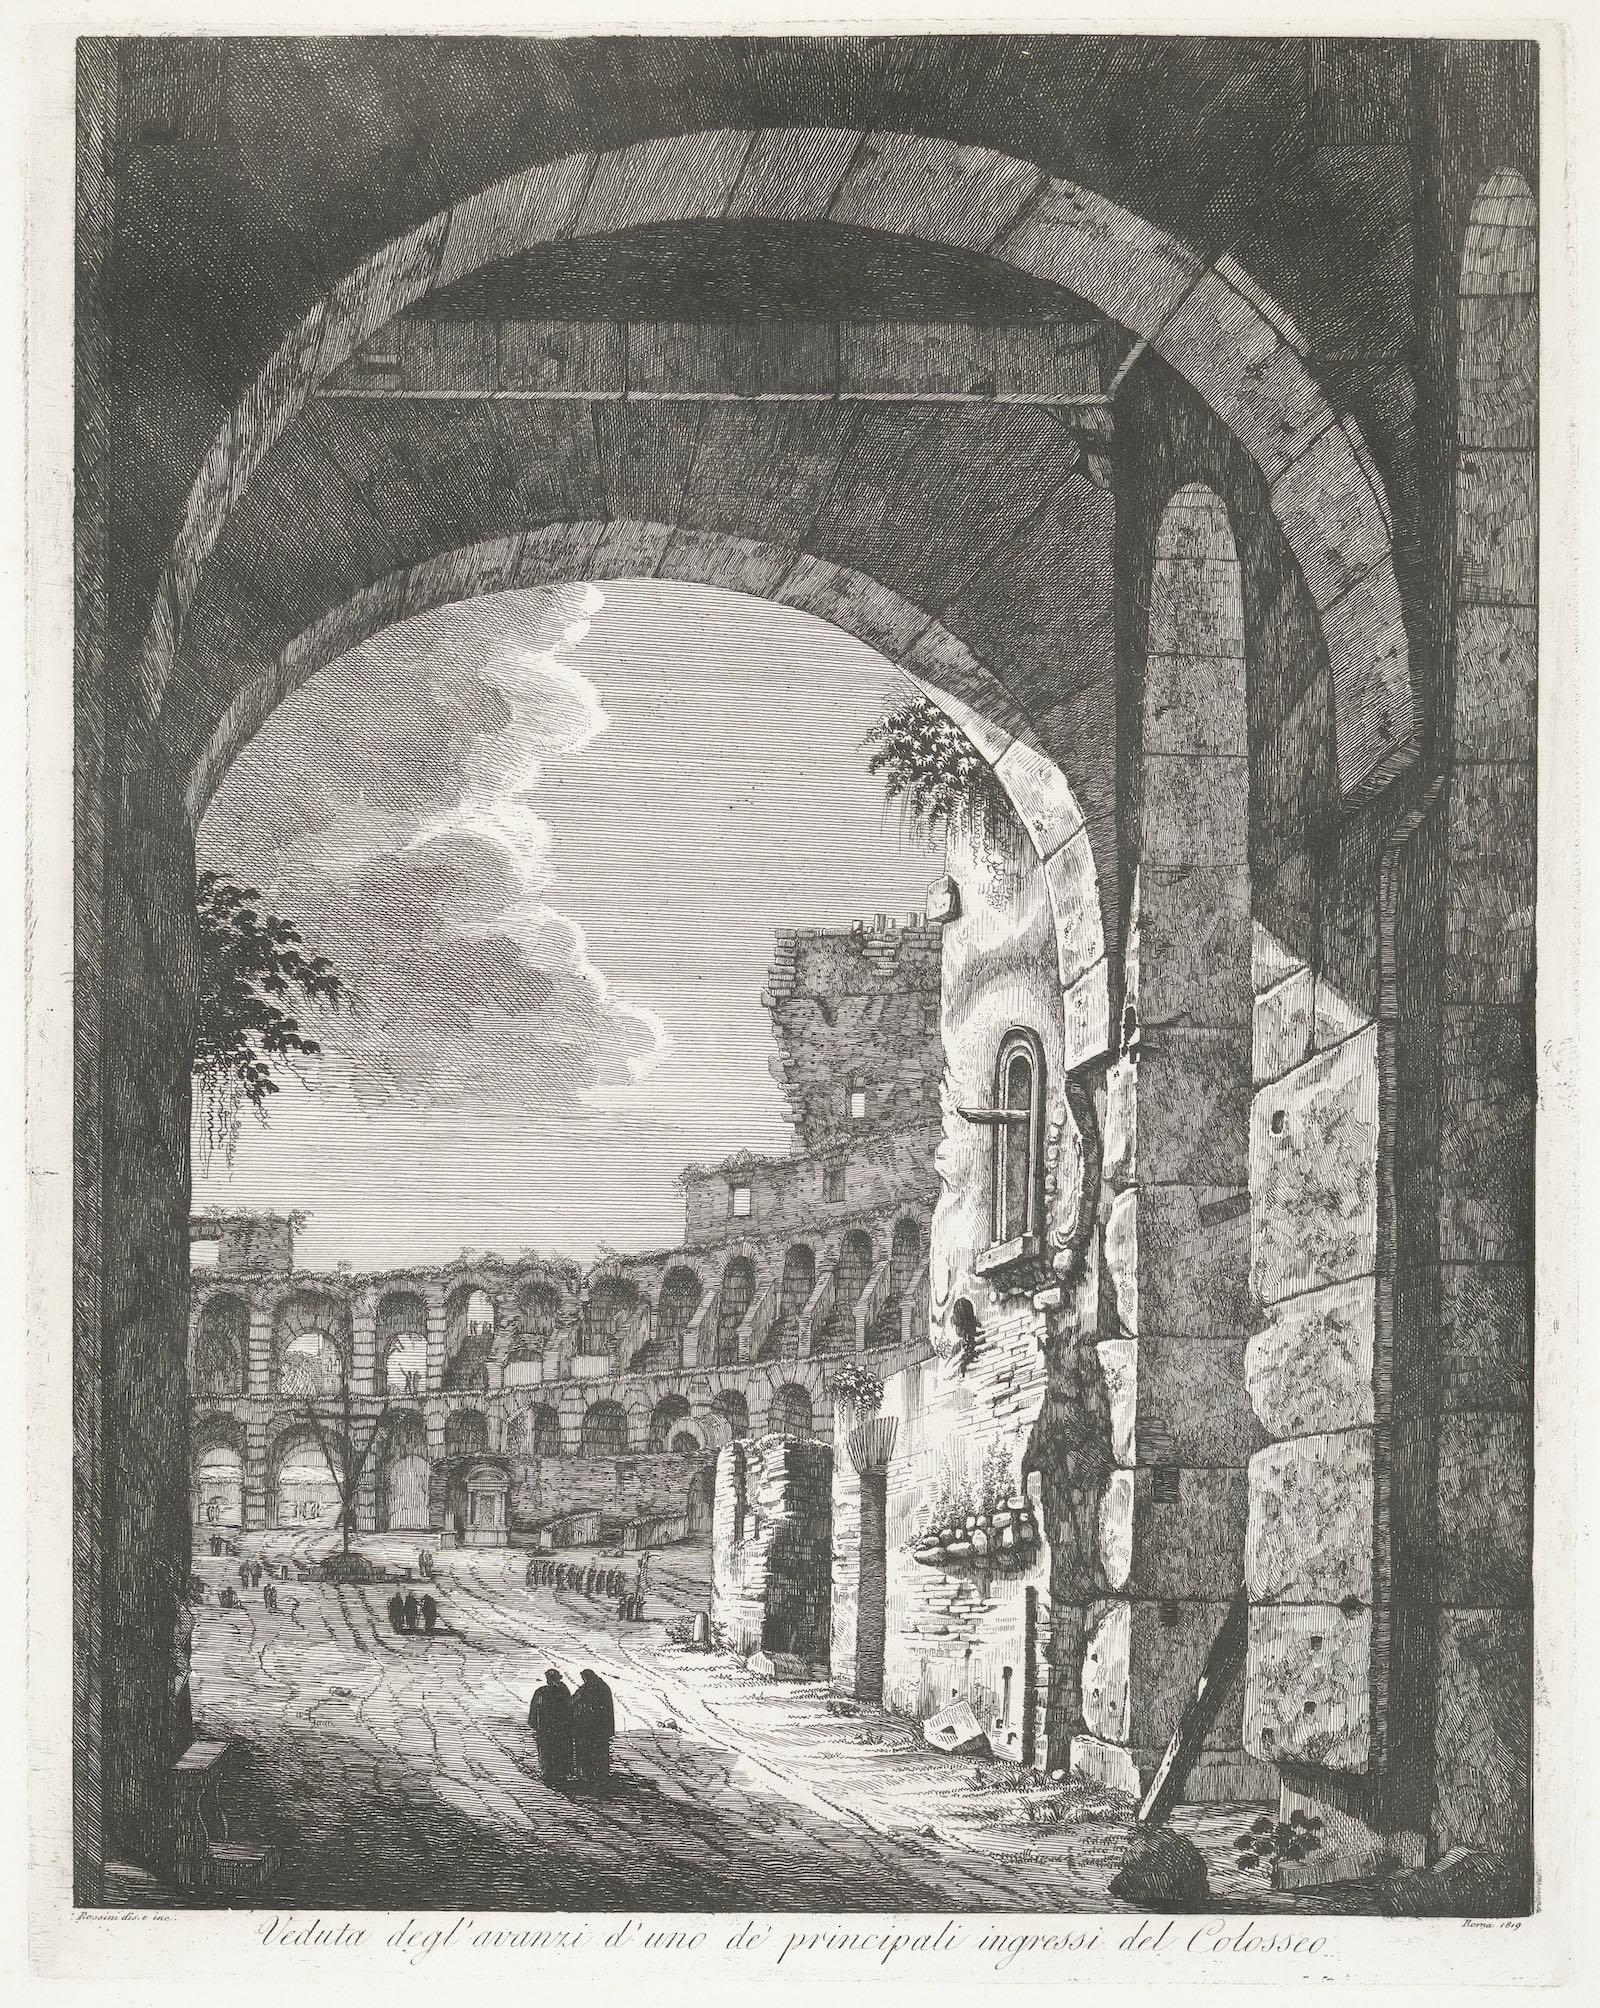 Print of the Colosseum by Luigi Rossini from 1819. Rijksmuseum, Amsterdam. 